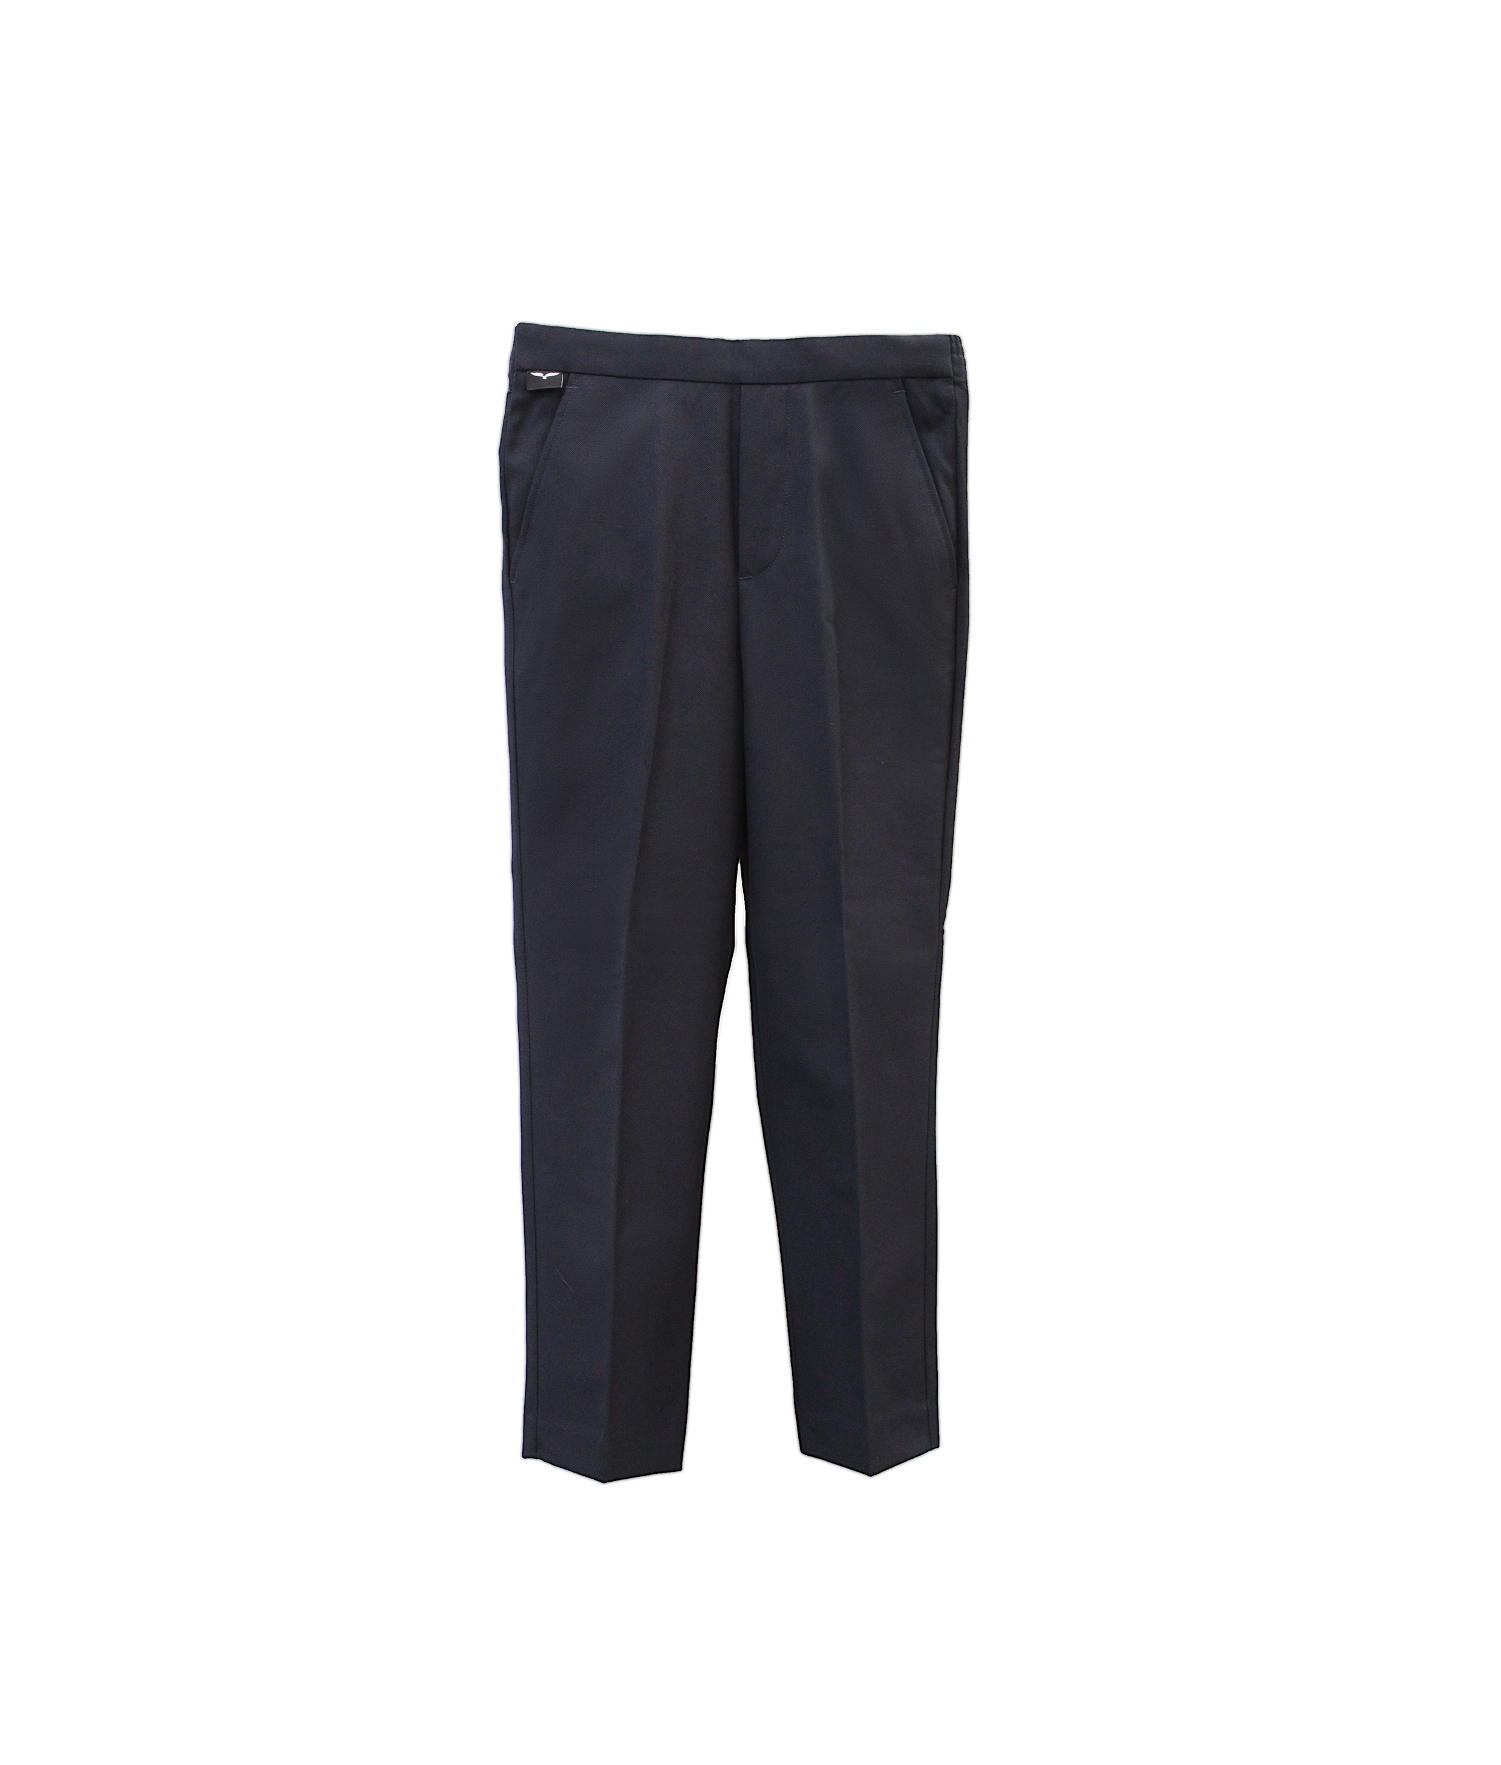 Boys Trousers Archives - Quality Schoolwear